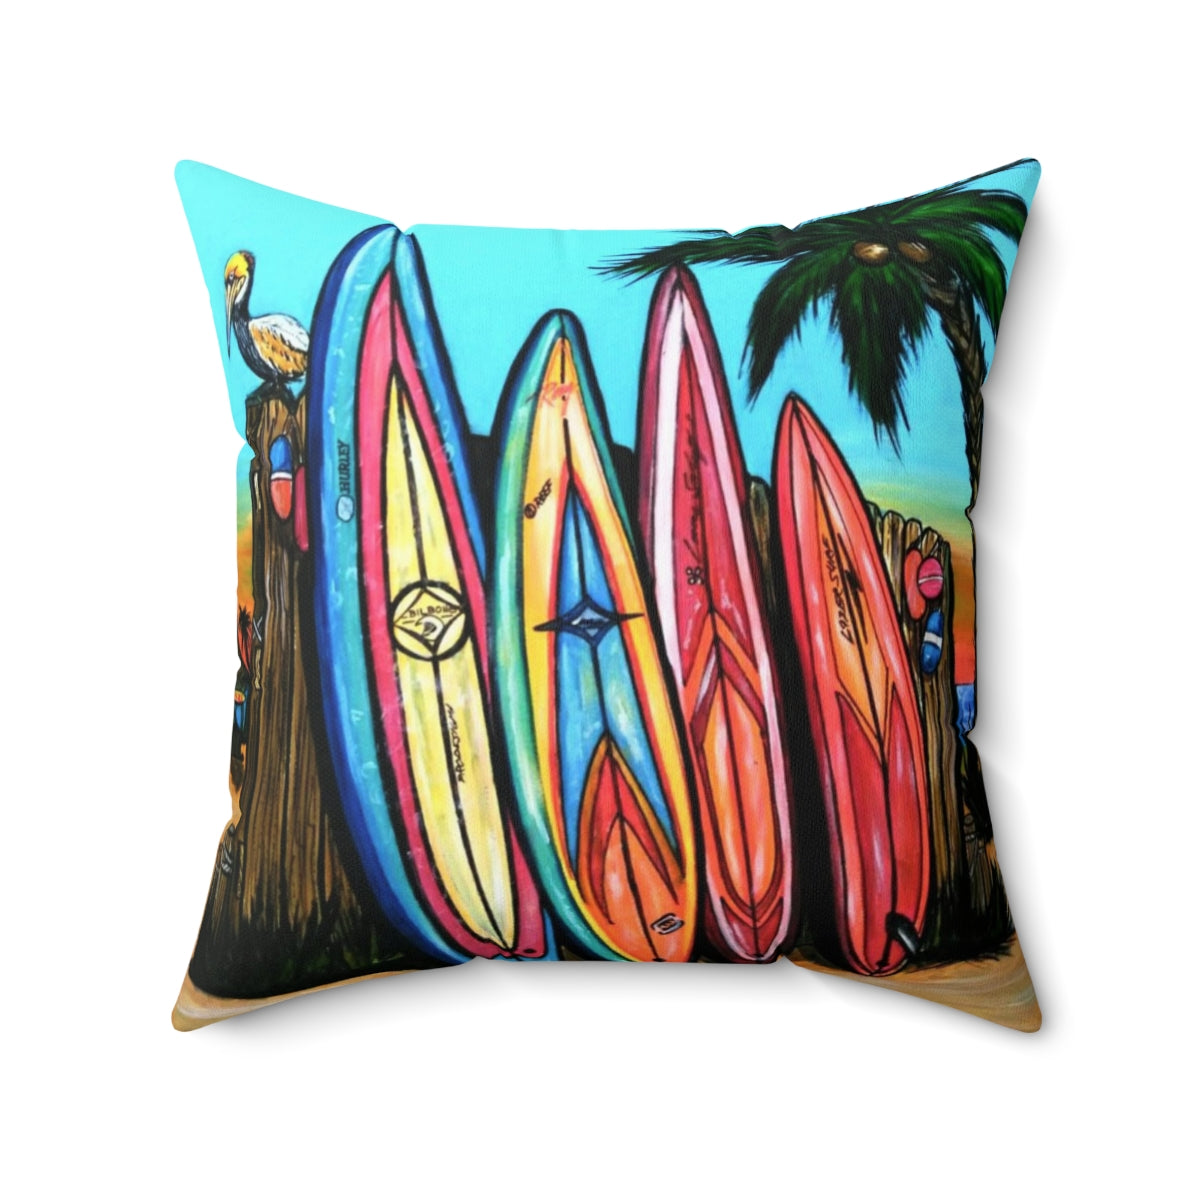 Waiting to Surf Square Pillow